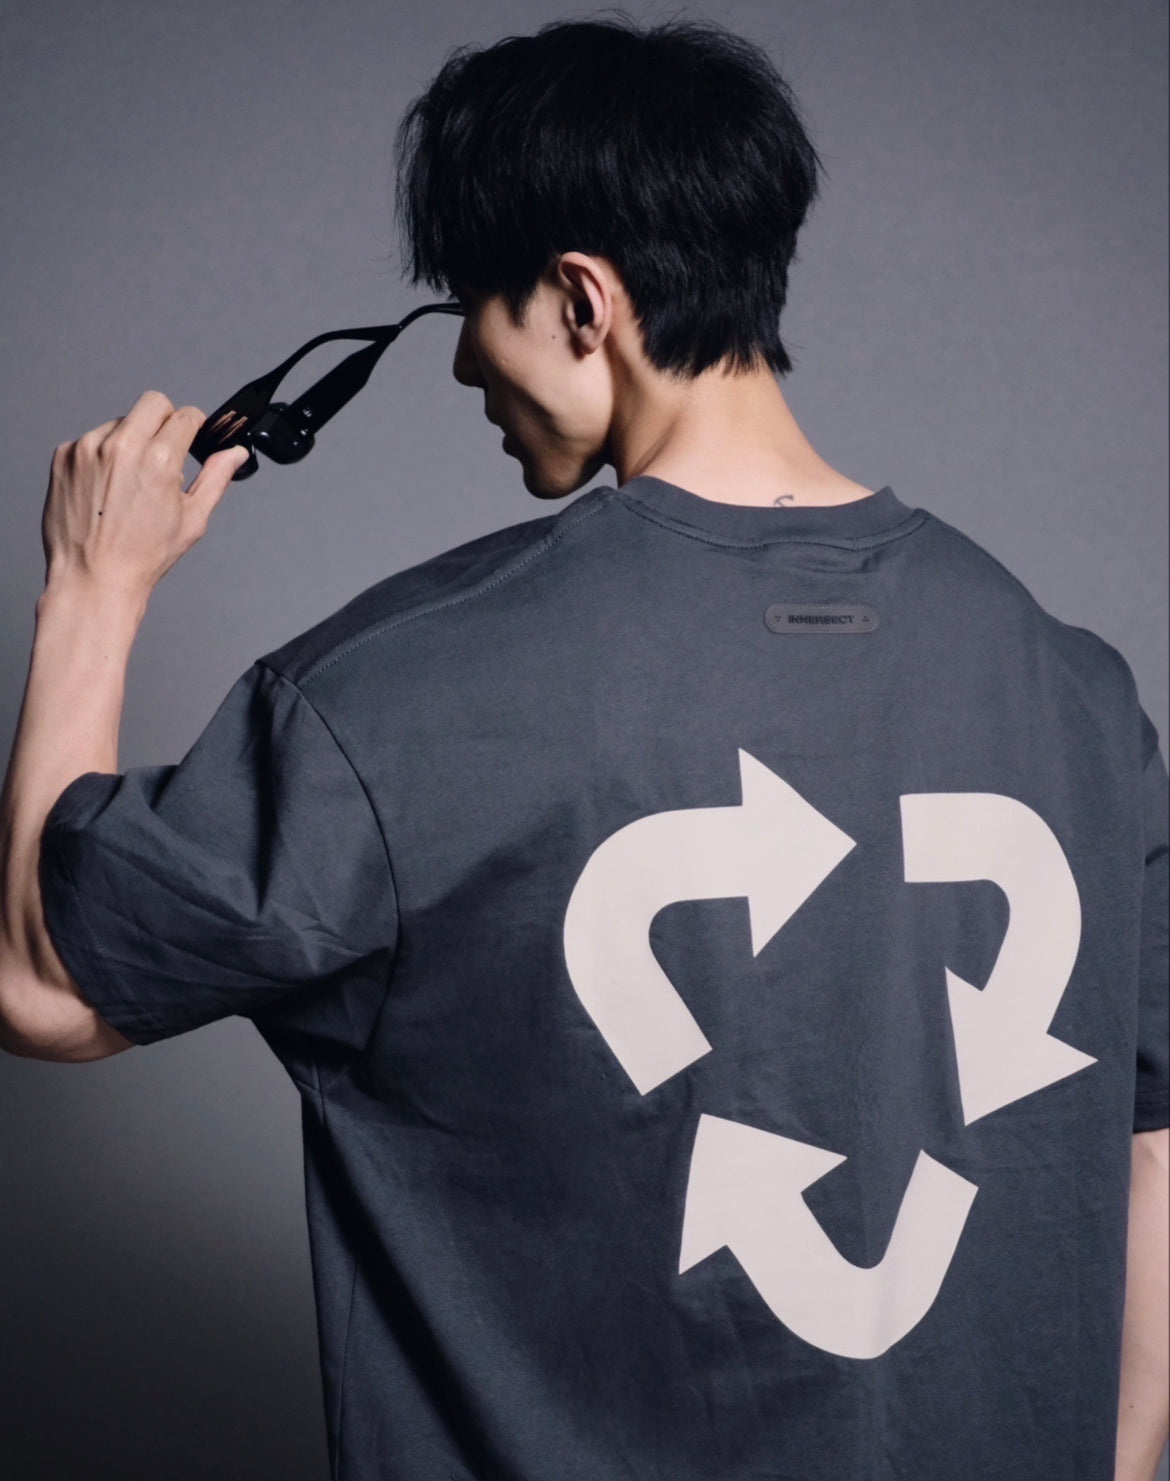 Innersect Recycle Tee